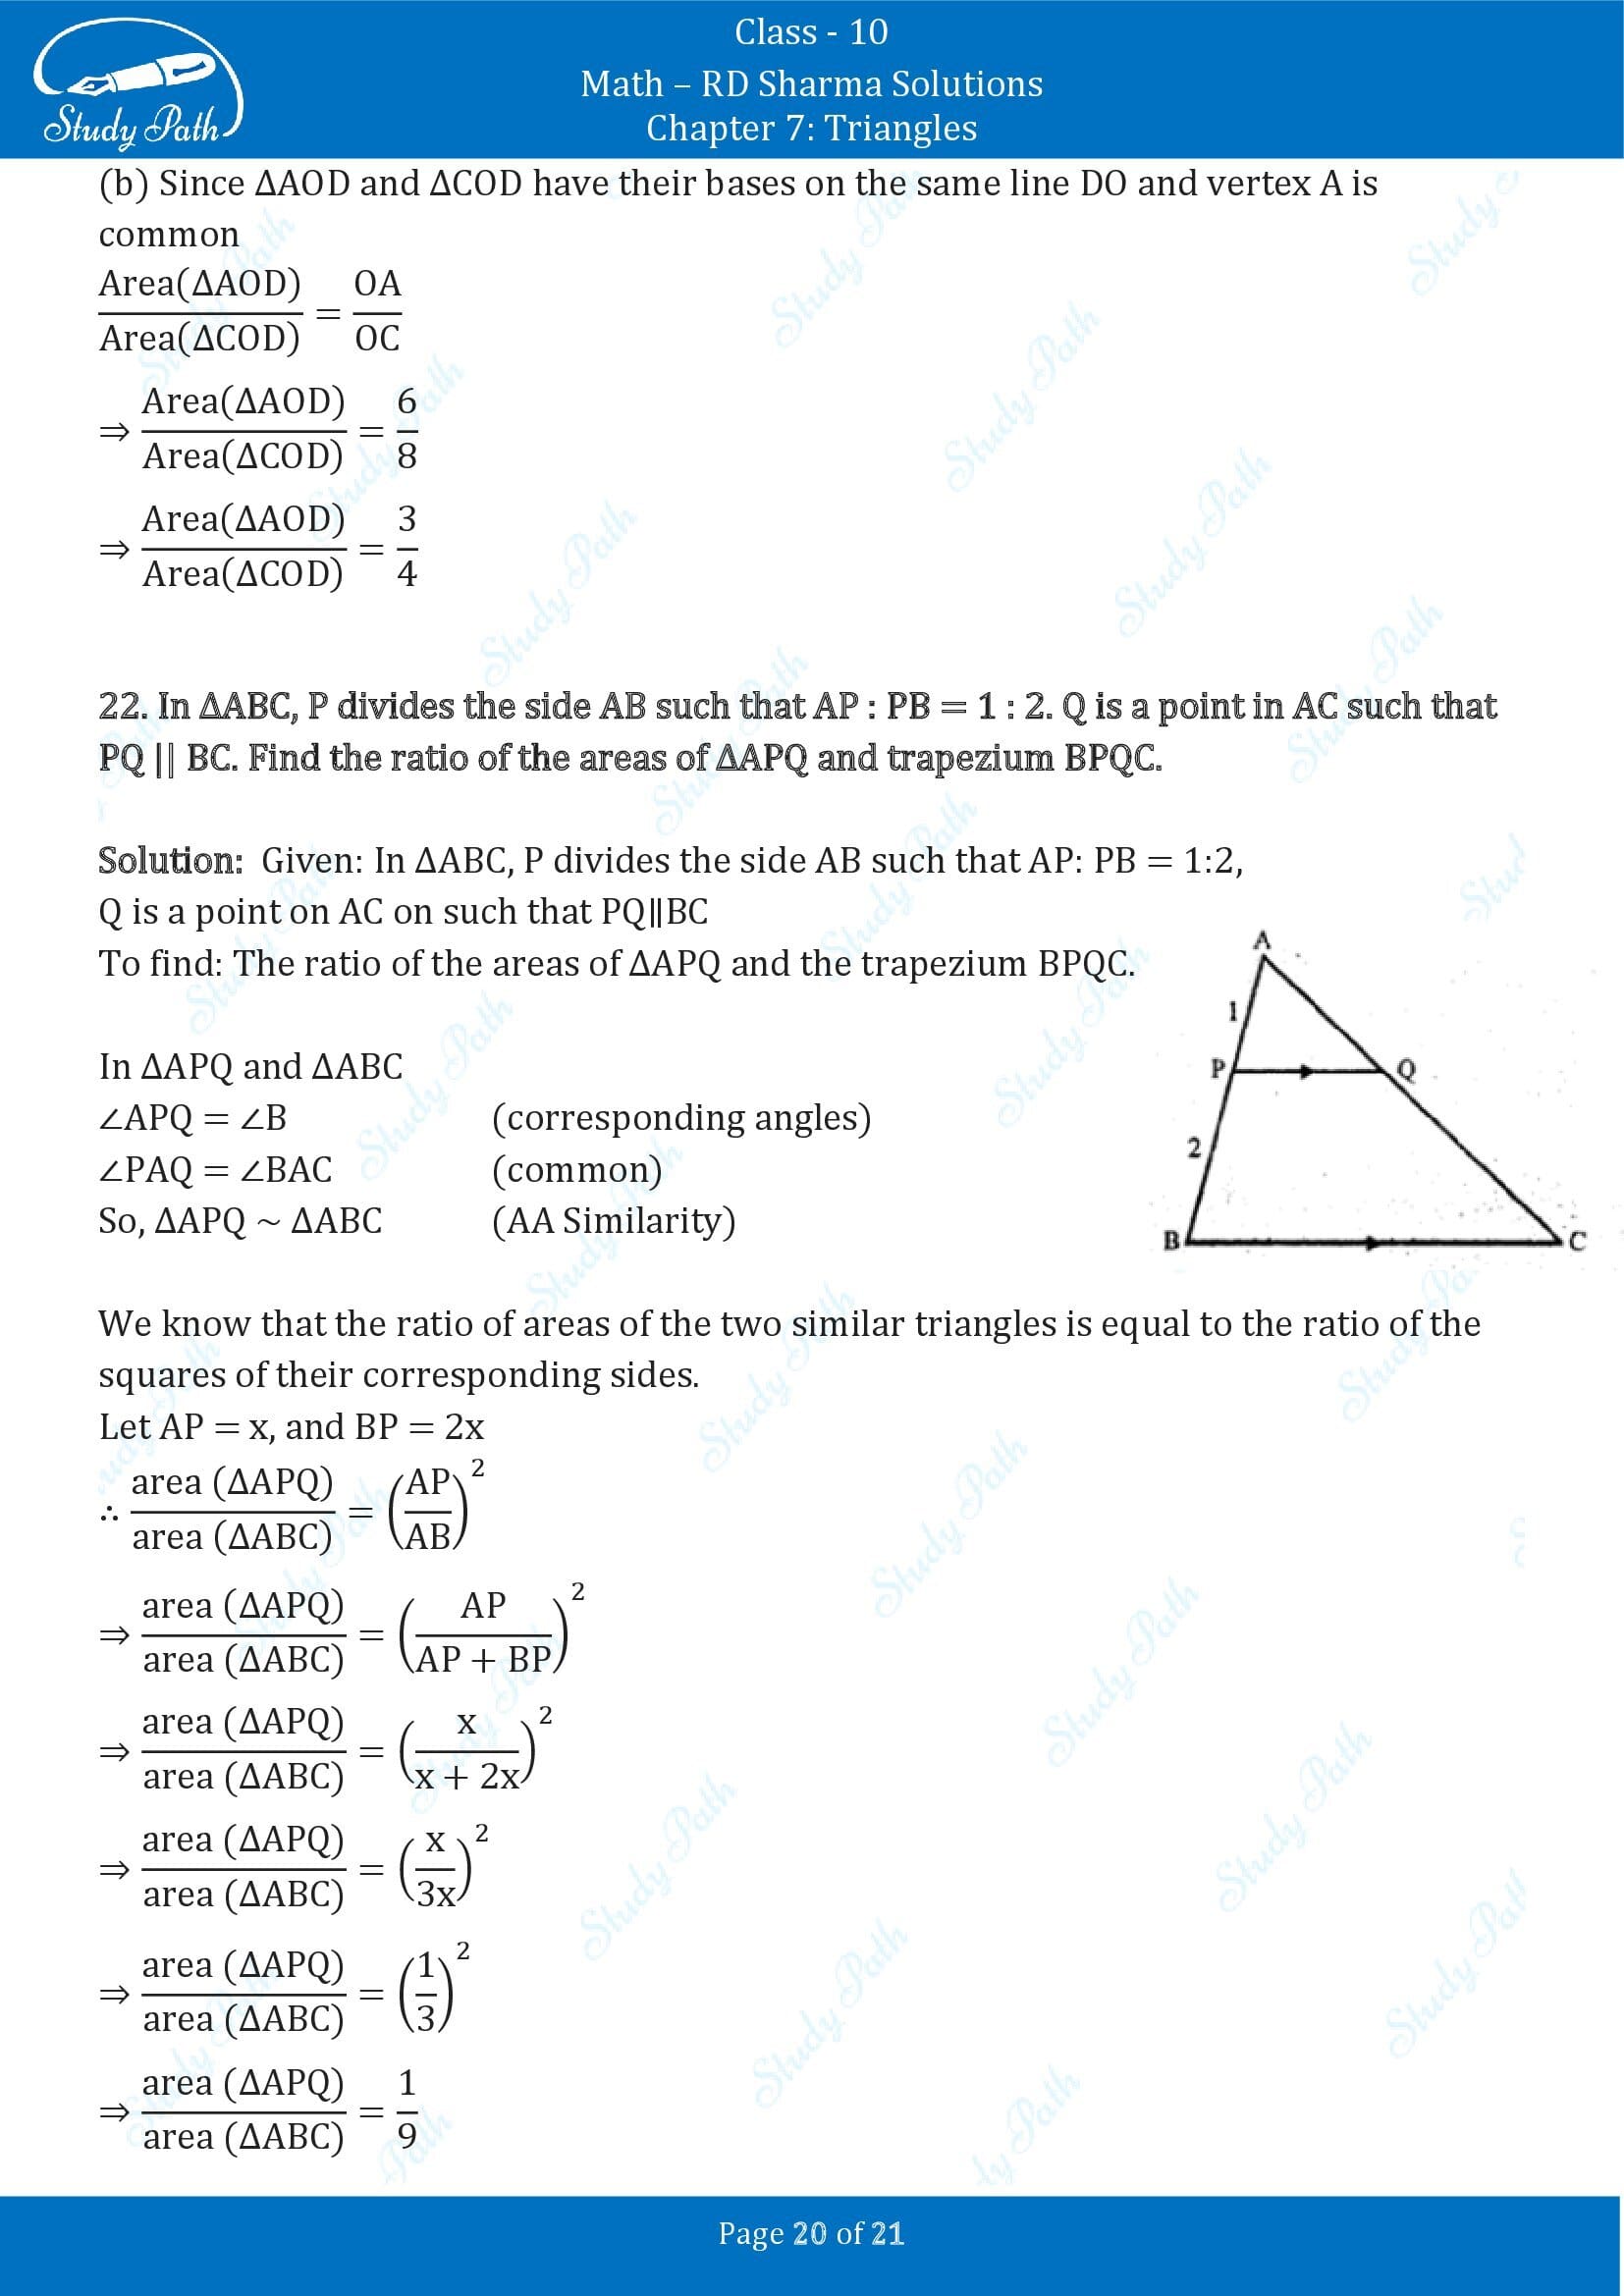 RD Sharma Solutions Class 10 Chapter 7 Triangles Exercise 7.6 00020